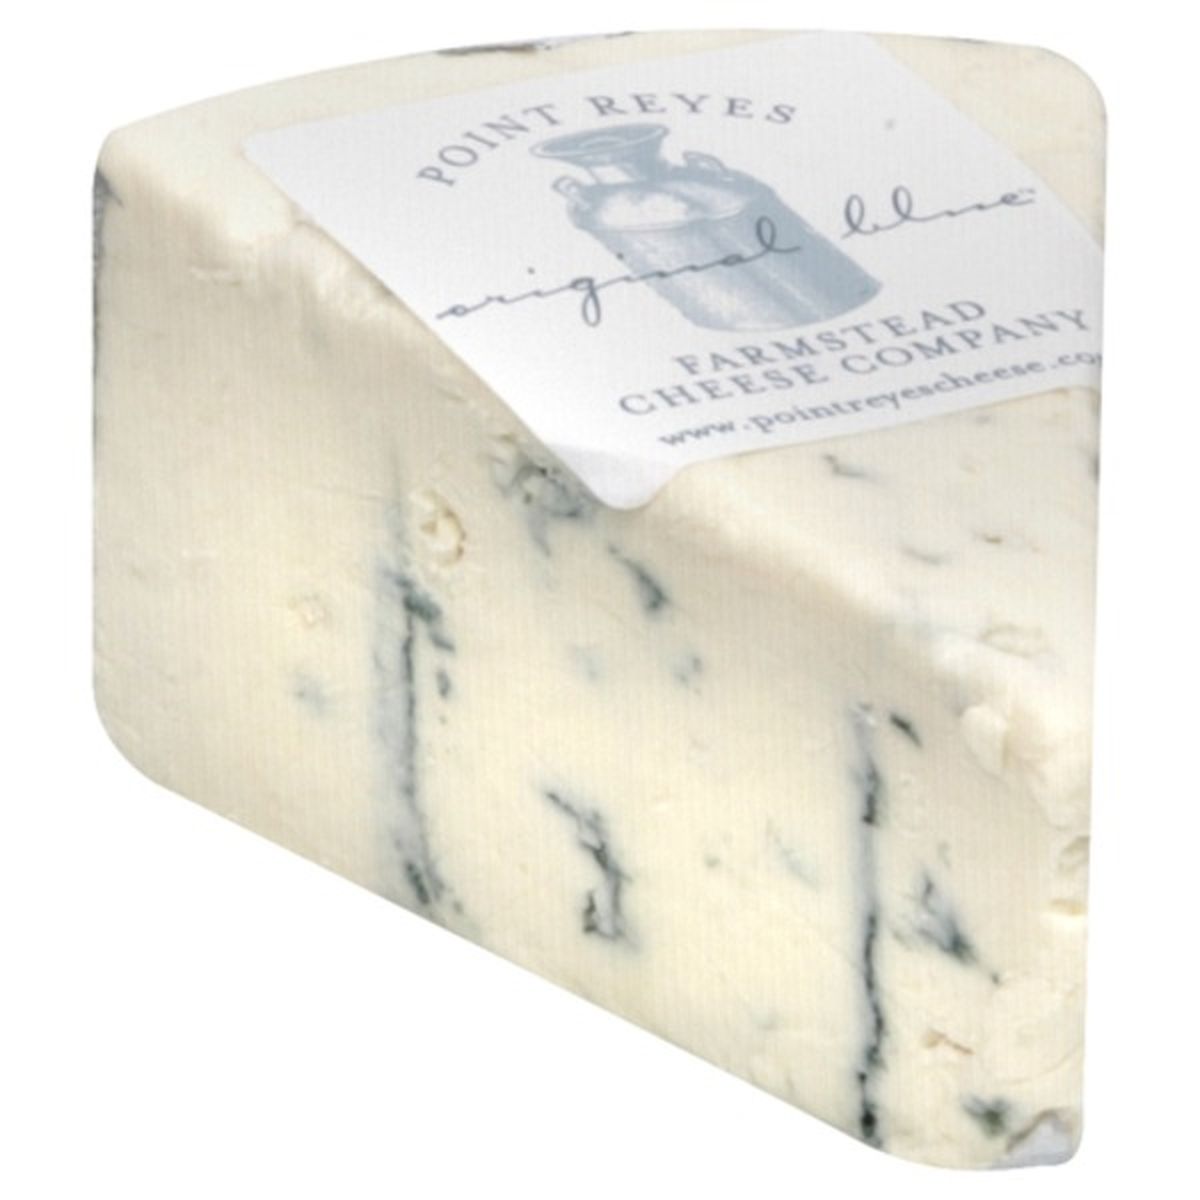 Calories in Point Reyes Farmstead Cheese Company Original Blue Cheese